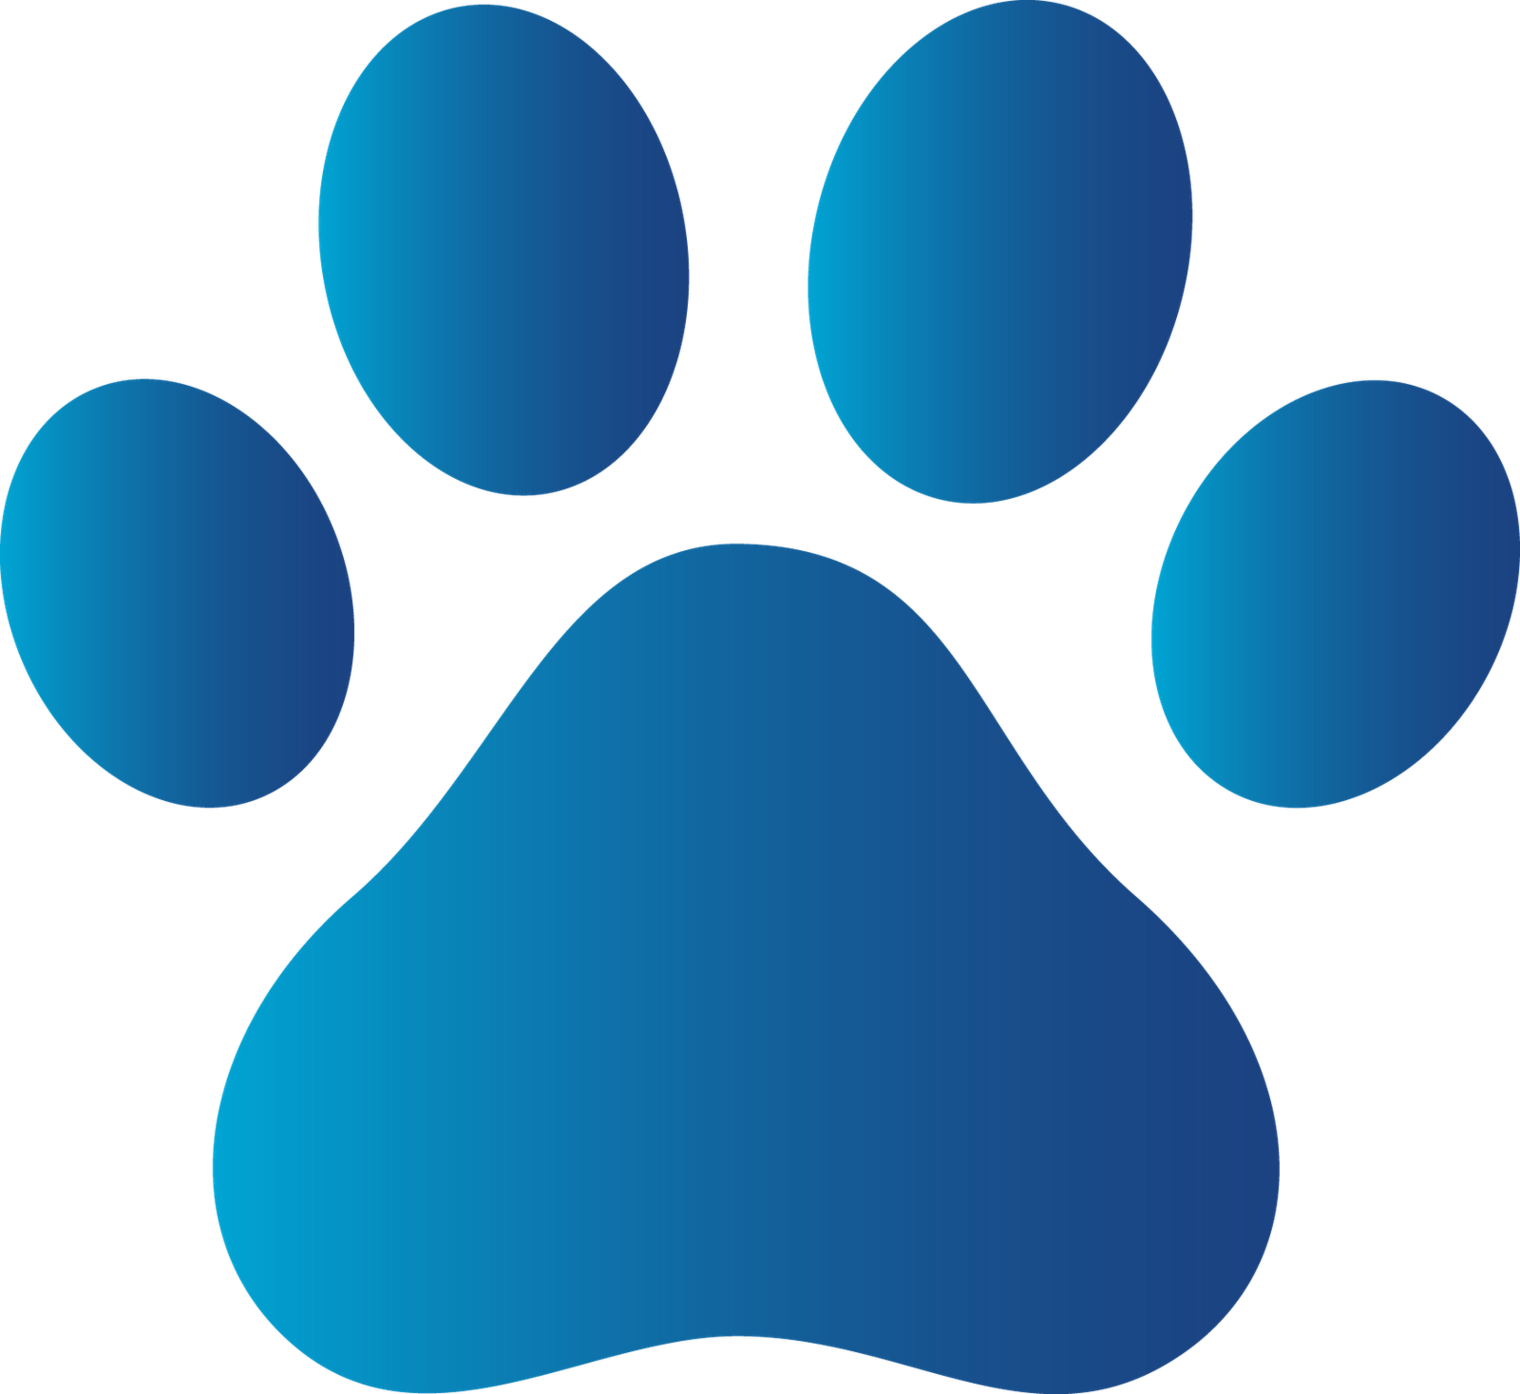 Blue Tiger Paw Print Clipart - Free to use Clip Art Resource